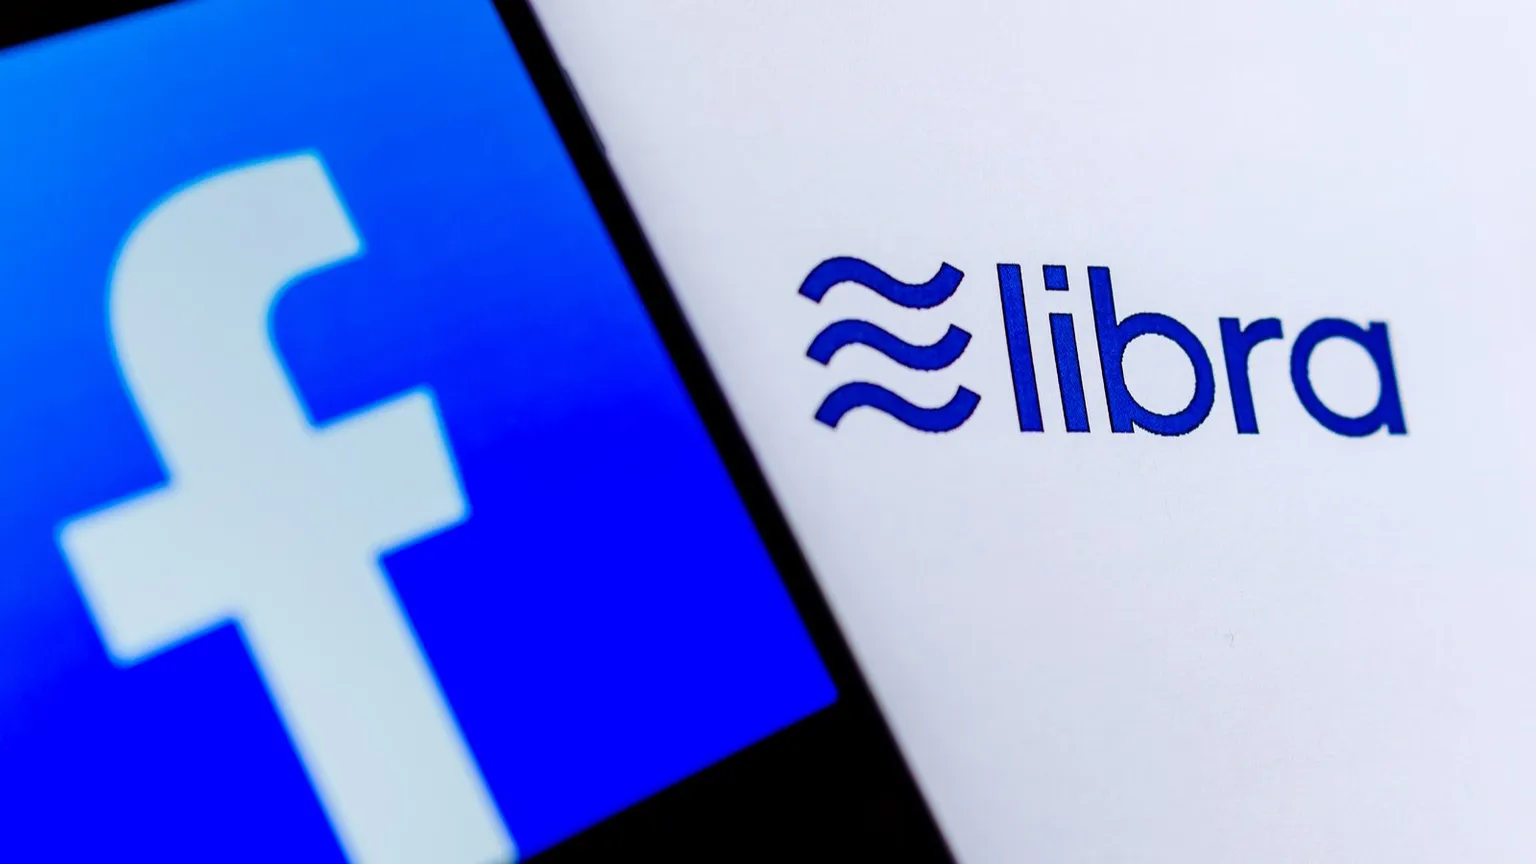 Photo of Facebook logo on the smartphone screen and the brochure with Libra logo